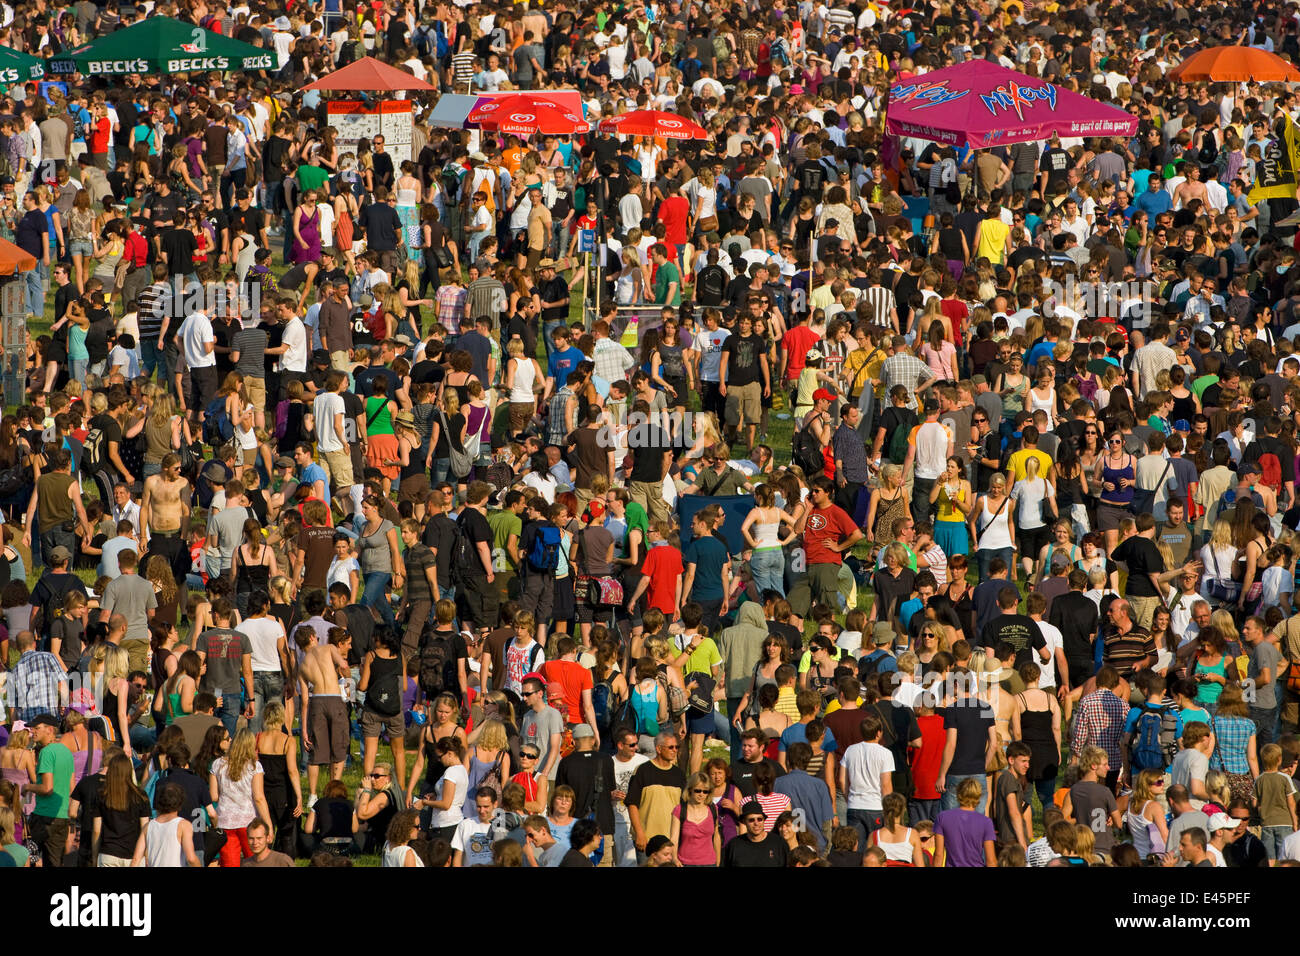 Aerial view of crowd of people at the Rheinkultur Festival, Bochum, Germany. Stock Photo